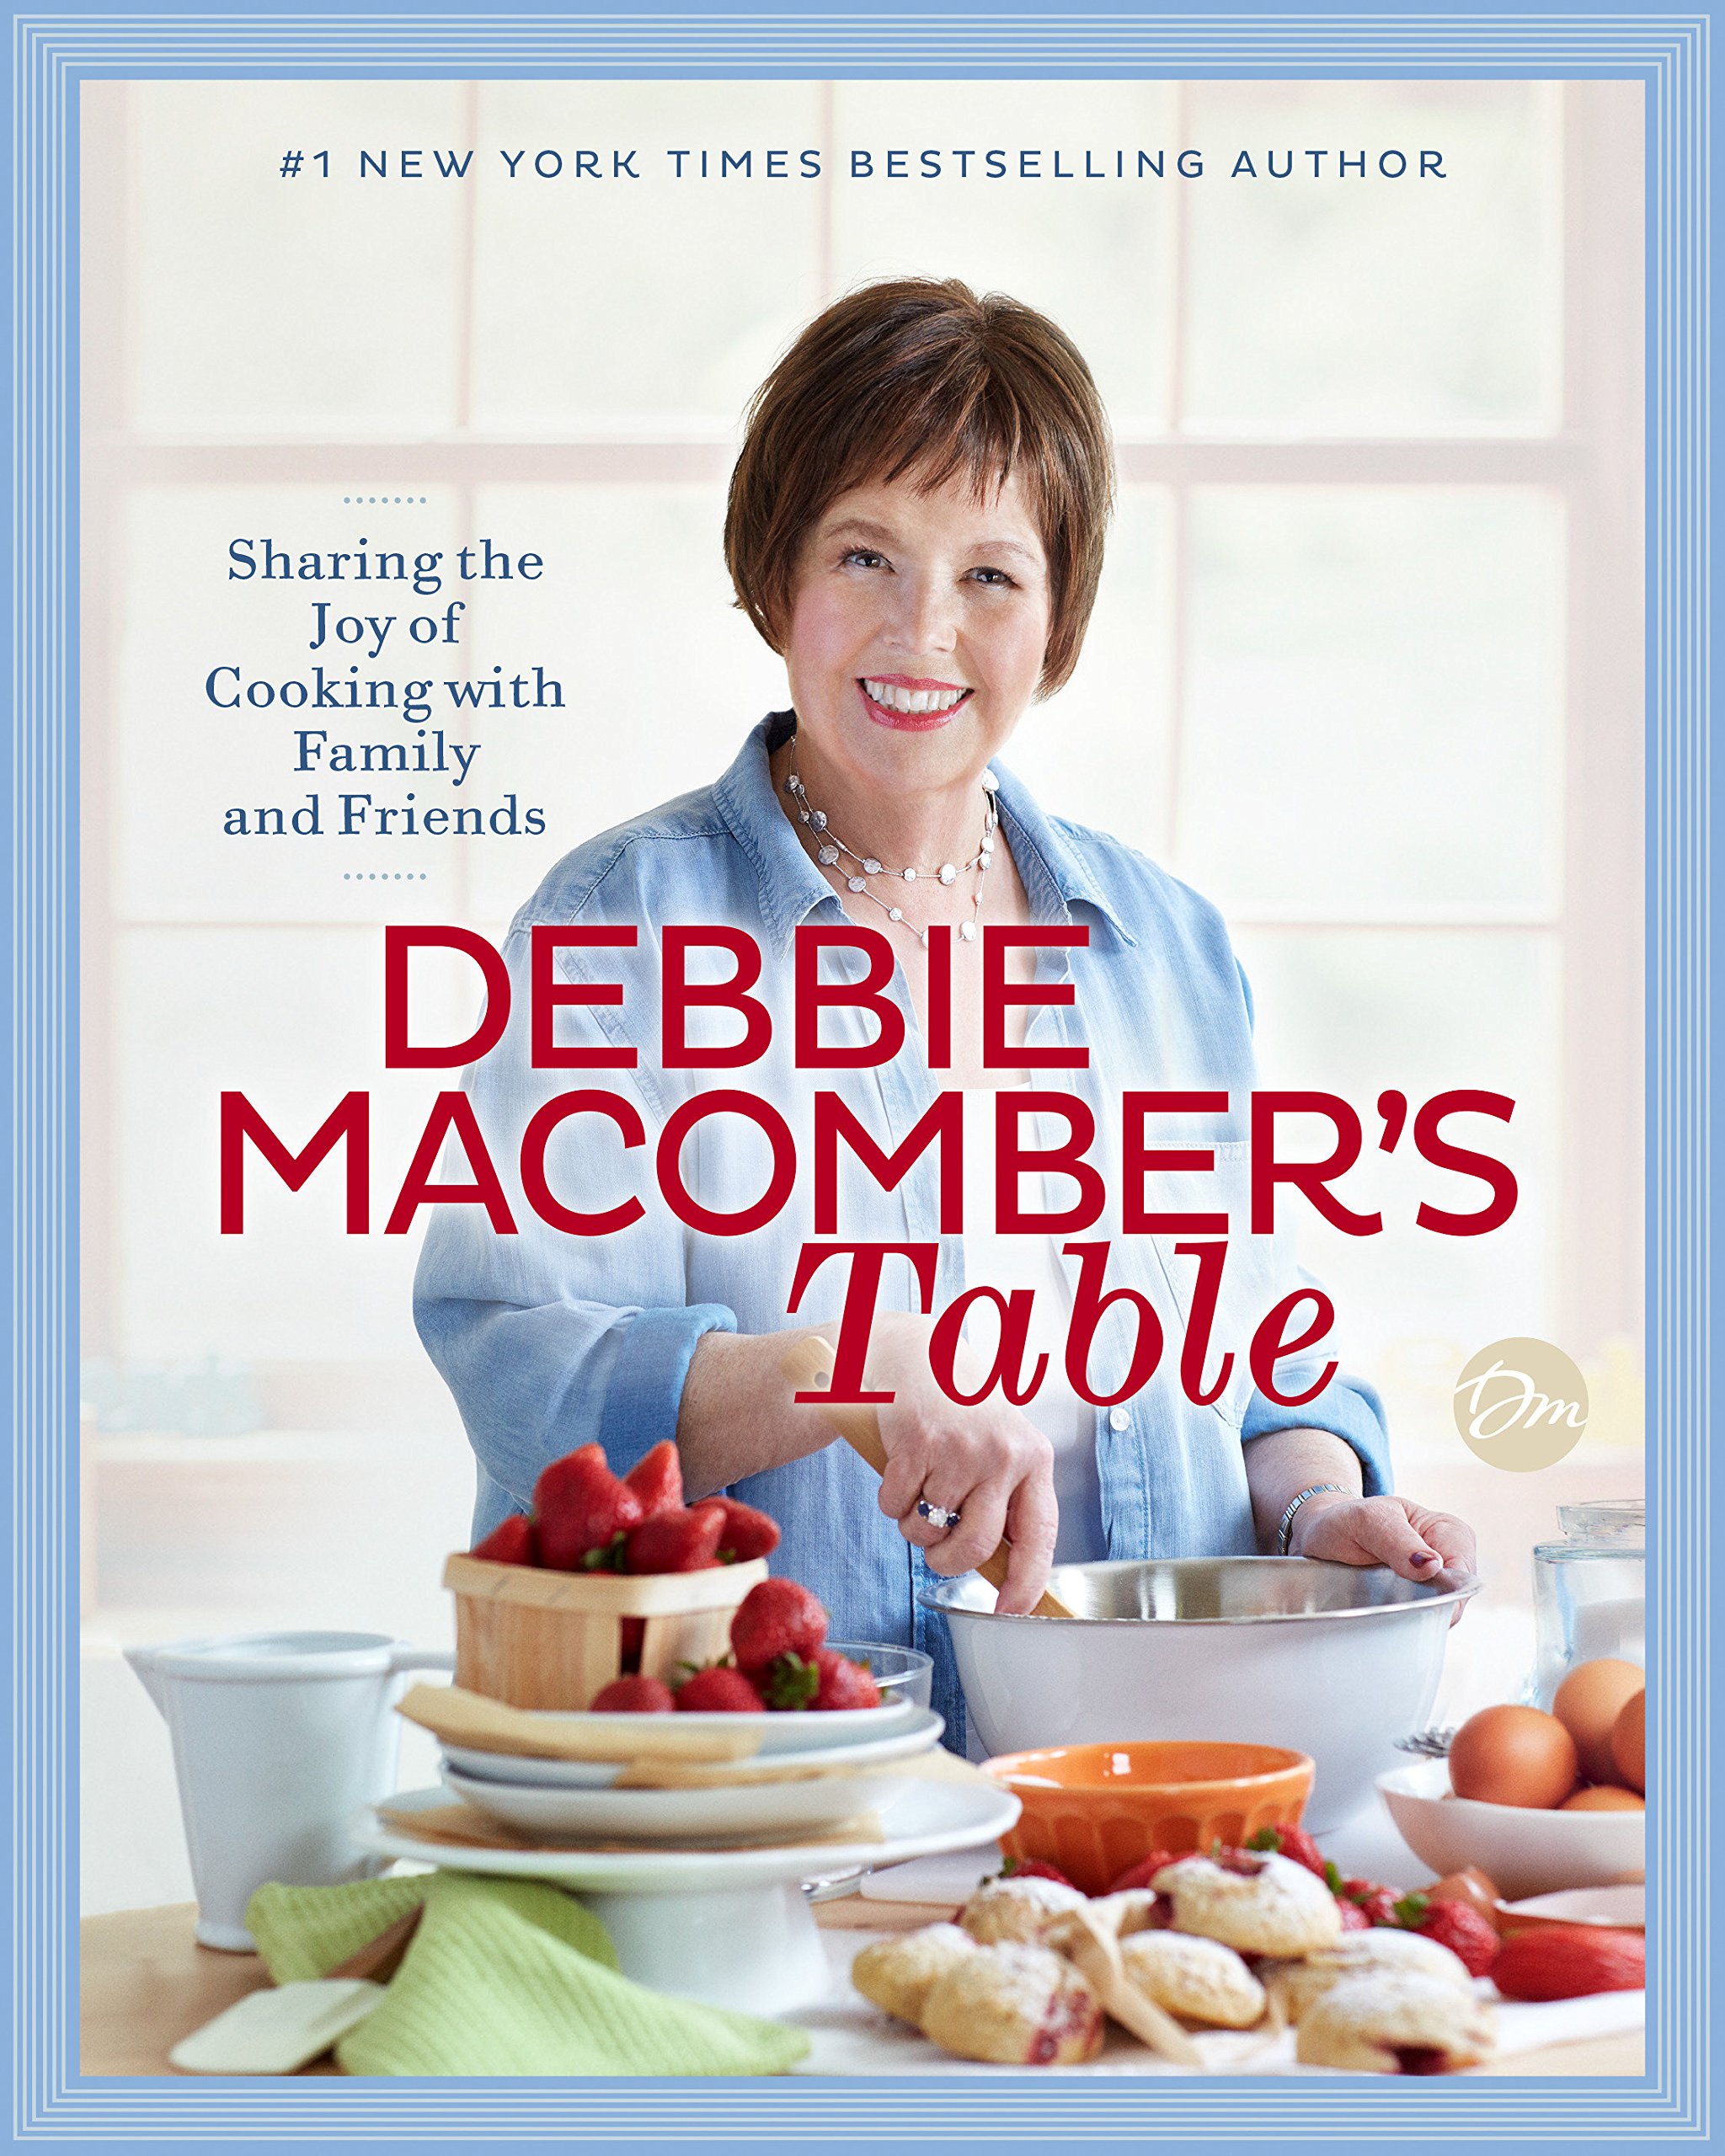 Image for "Debbie Macomber's Table"